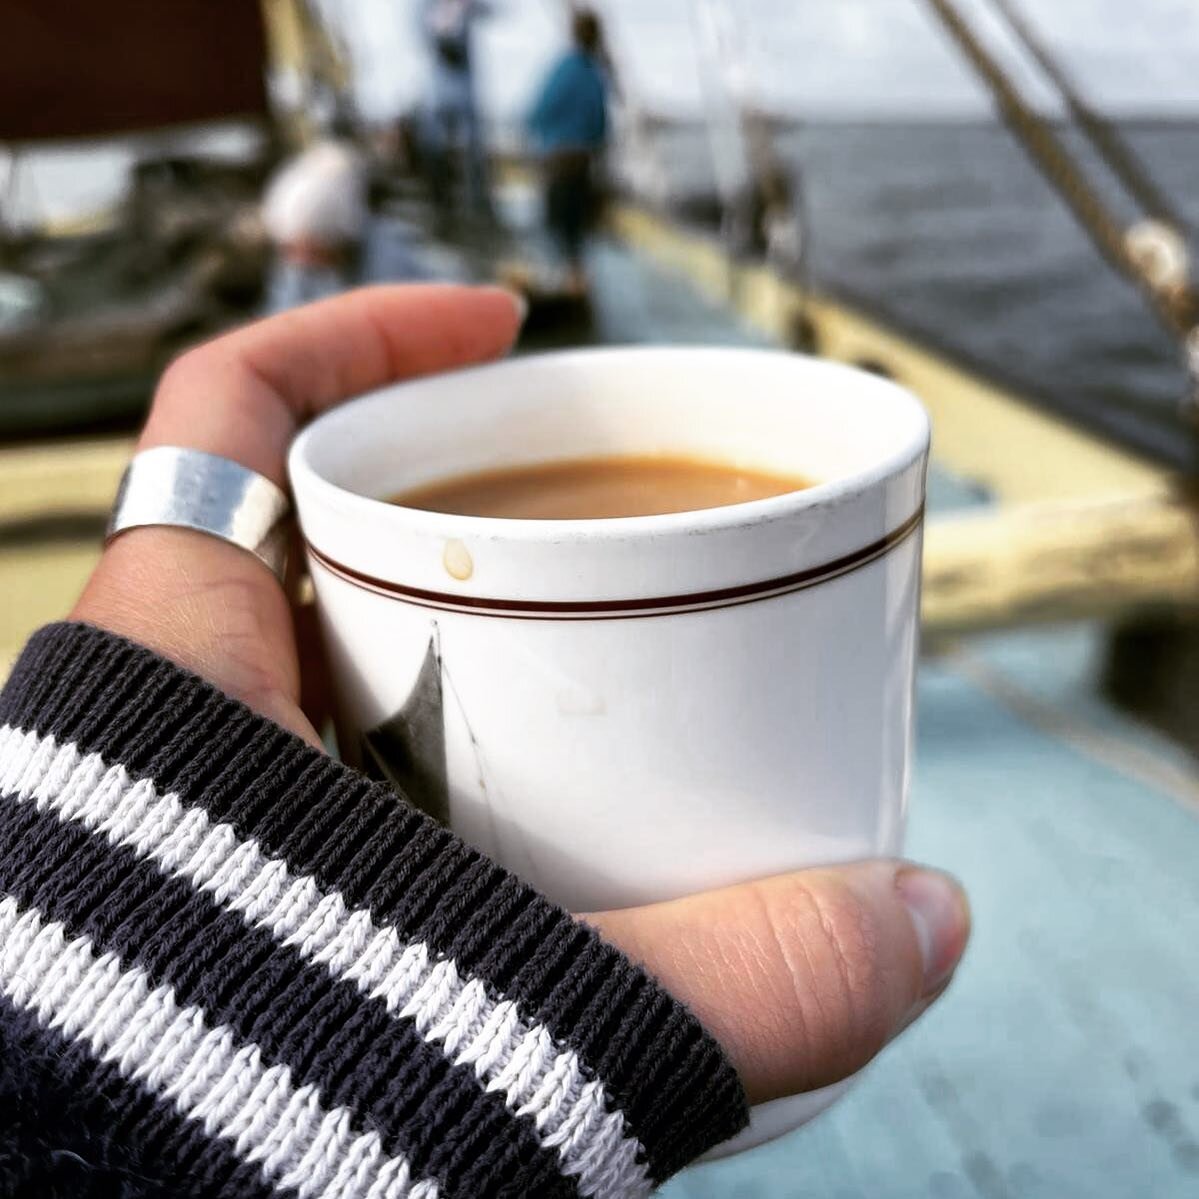 Always a cuppa and warm welcome awaiting you at @tillerandwheel aboard SB Edith May. 

Enjoying an early morning brew aboard today at the Medway Barge Match.

Fingers crossed we should be out there next year with you.
.
.
.
.
@l.march @_zoevictoria #